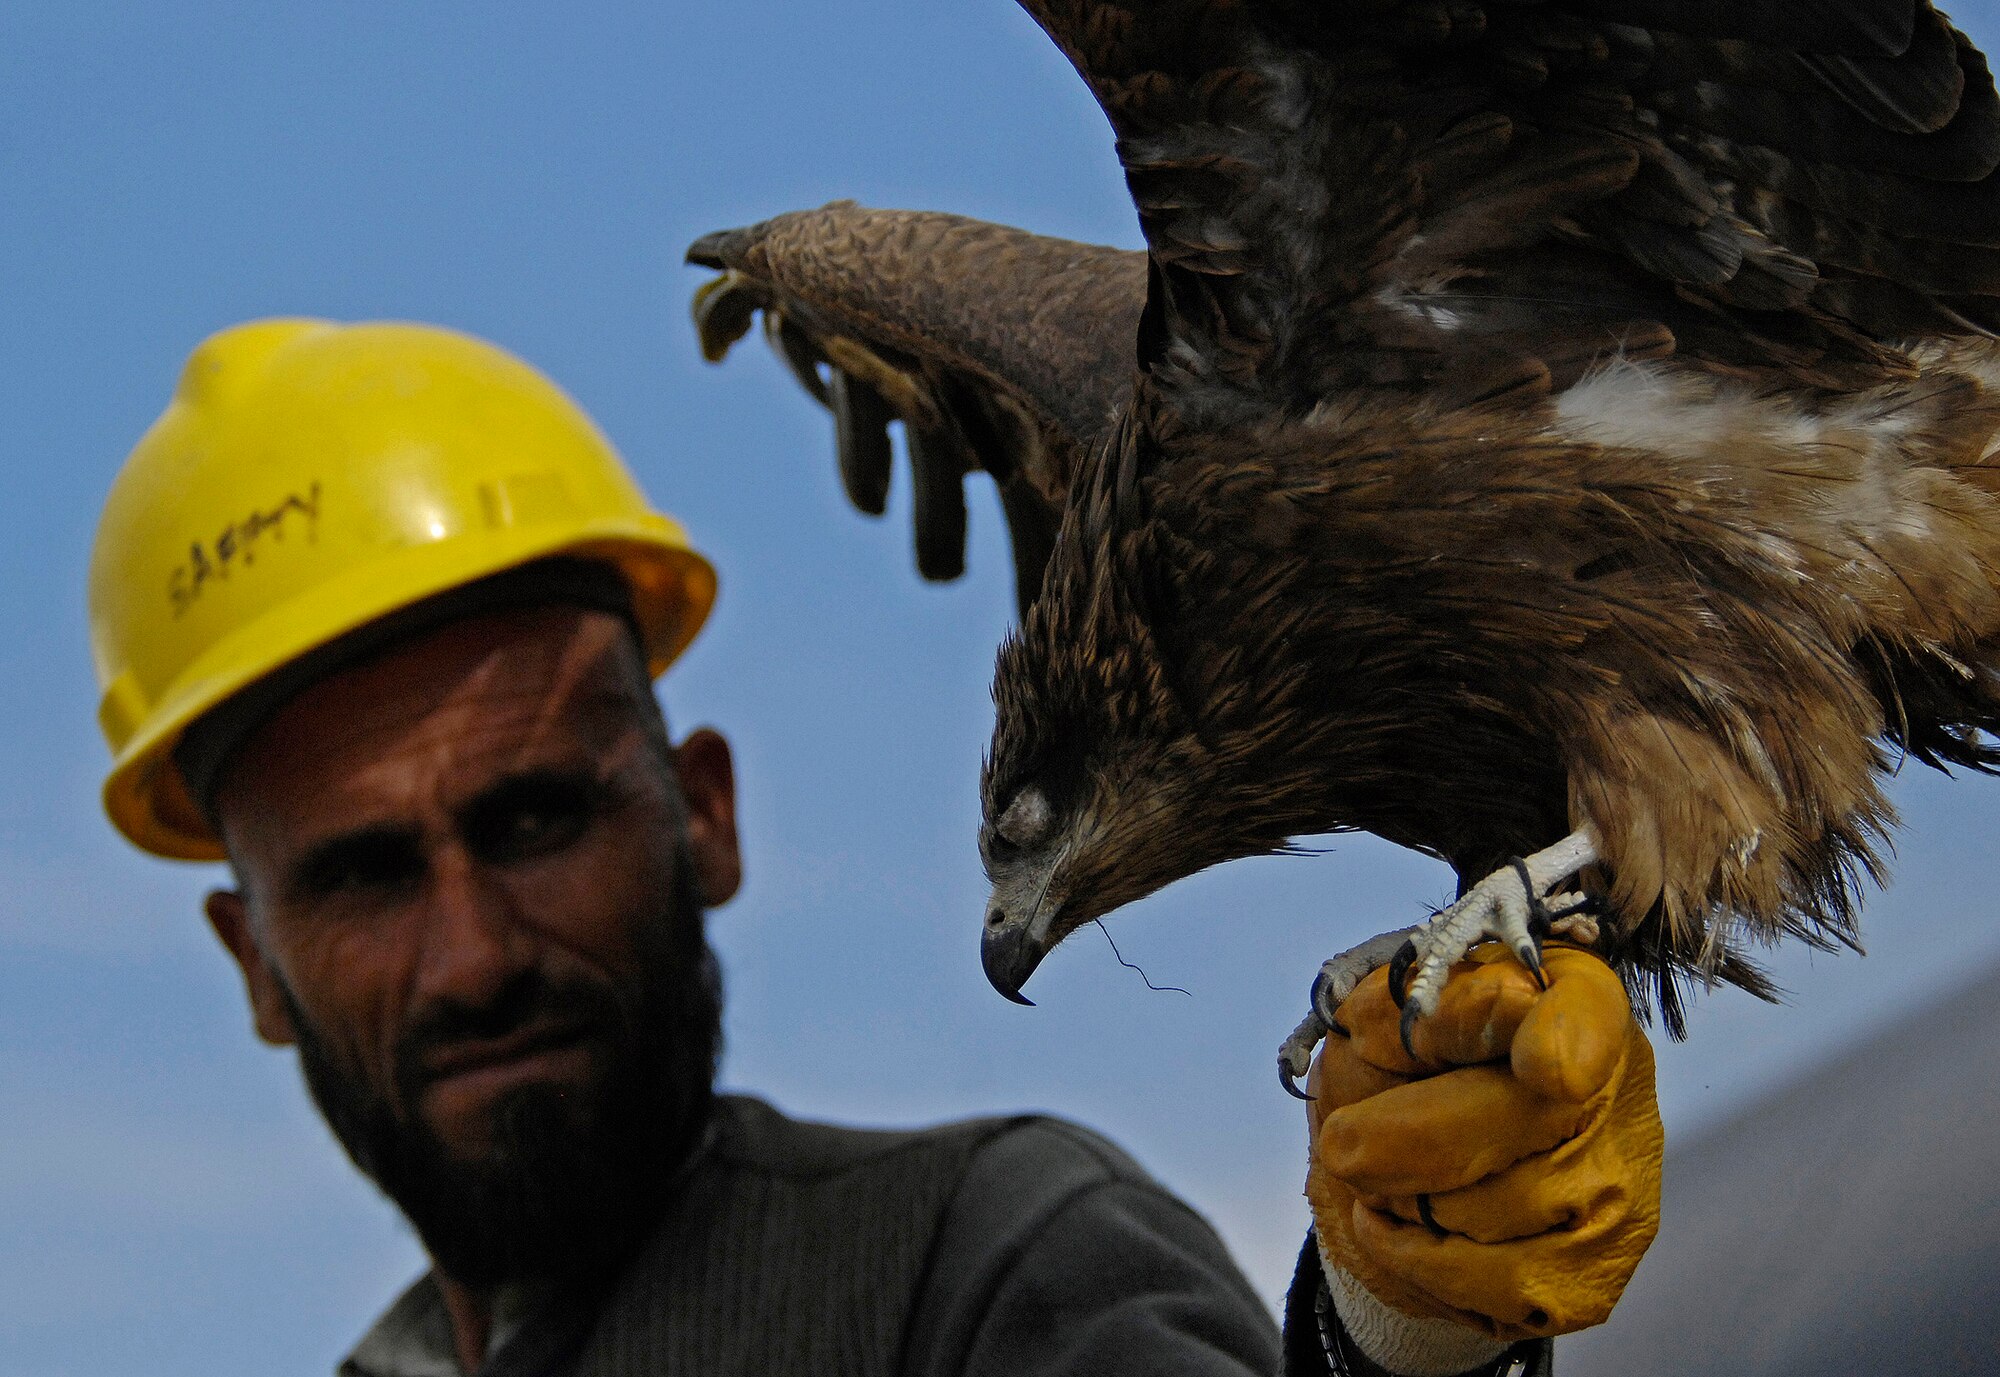 An Afghan falconer holds out a kite bird that one of his falcons caught near Bagram's burn pit area March 29. Lt. Col. Charles Wallace, 455th Air Expeditionary Wing safety chief, and his team of six safety experts hired three local falconers to help clear out areas near the flightline that were swarmed with thousands of birds. After a week of work, the falconers had caught or killed more than 250 birds surrounding the flightline and have apparently scared off most of the remaining birds over the past three weeks.